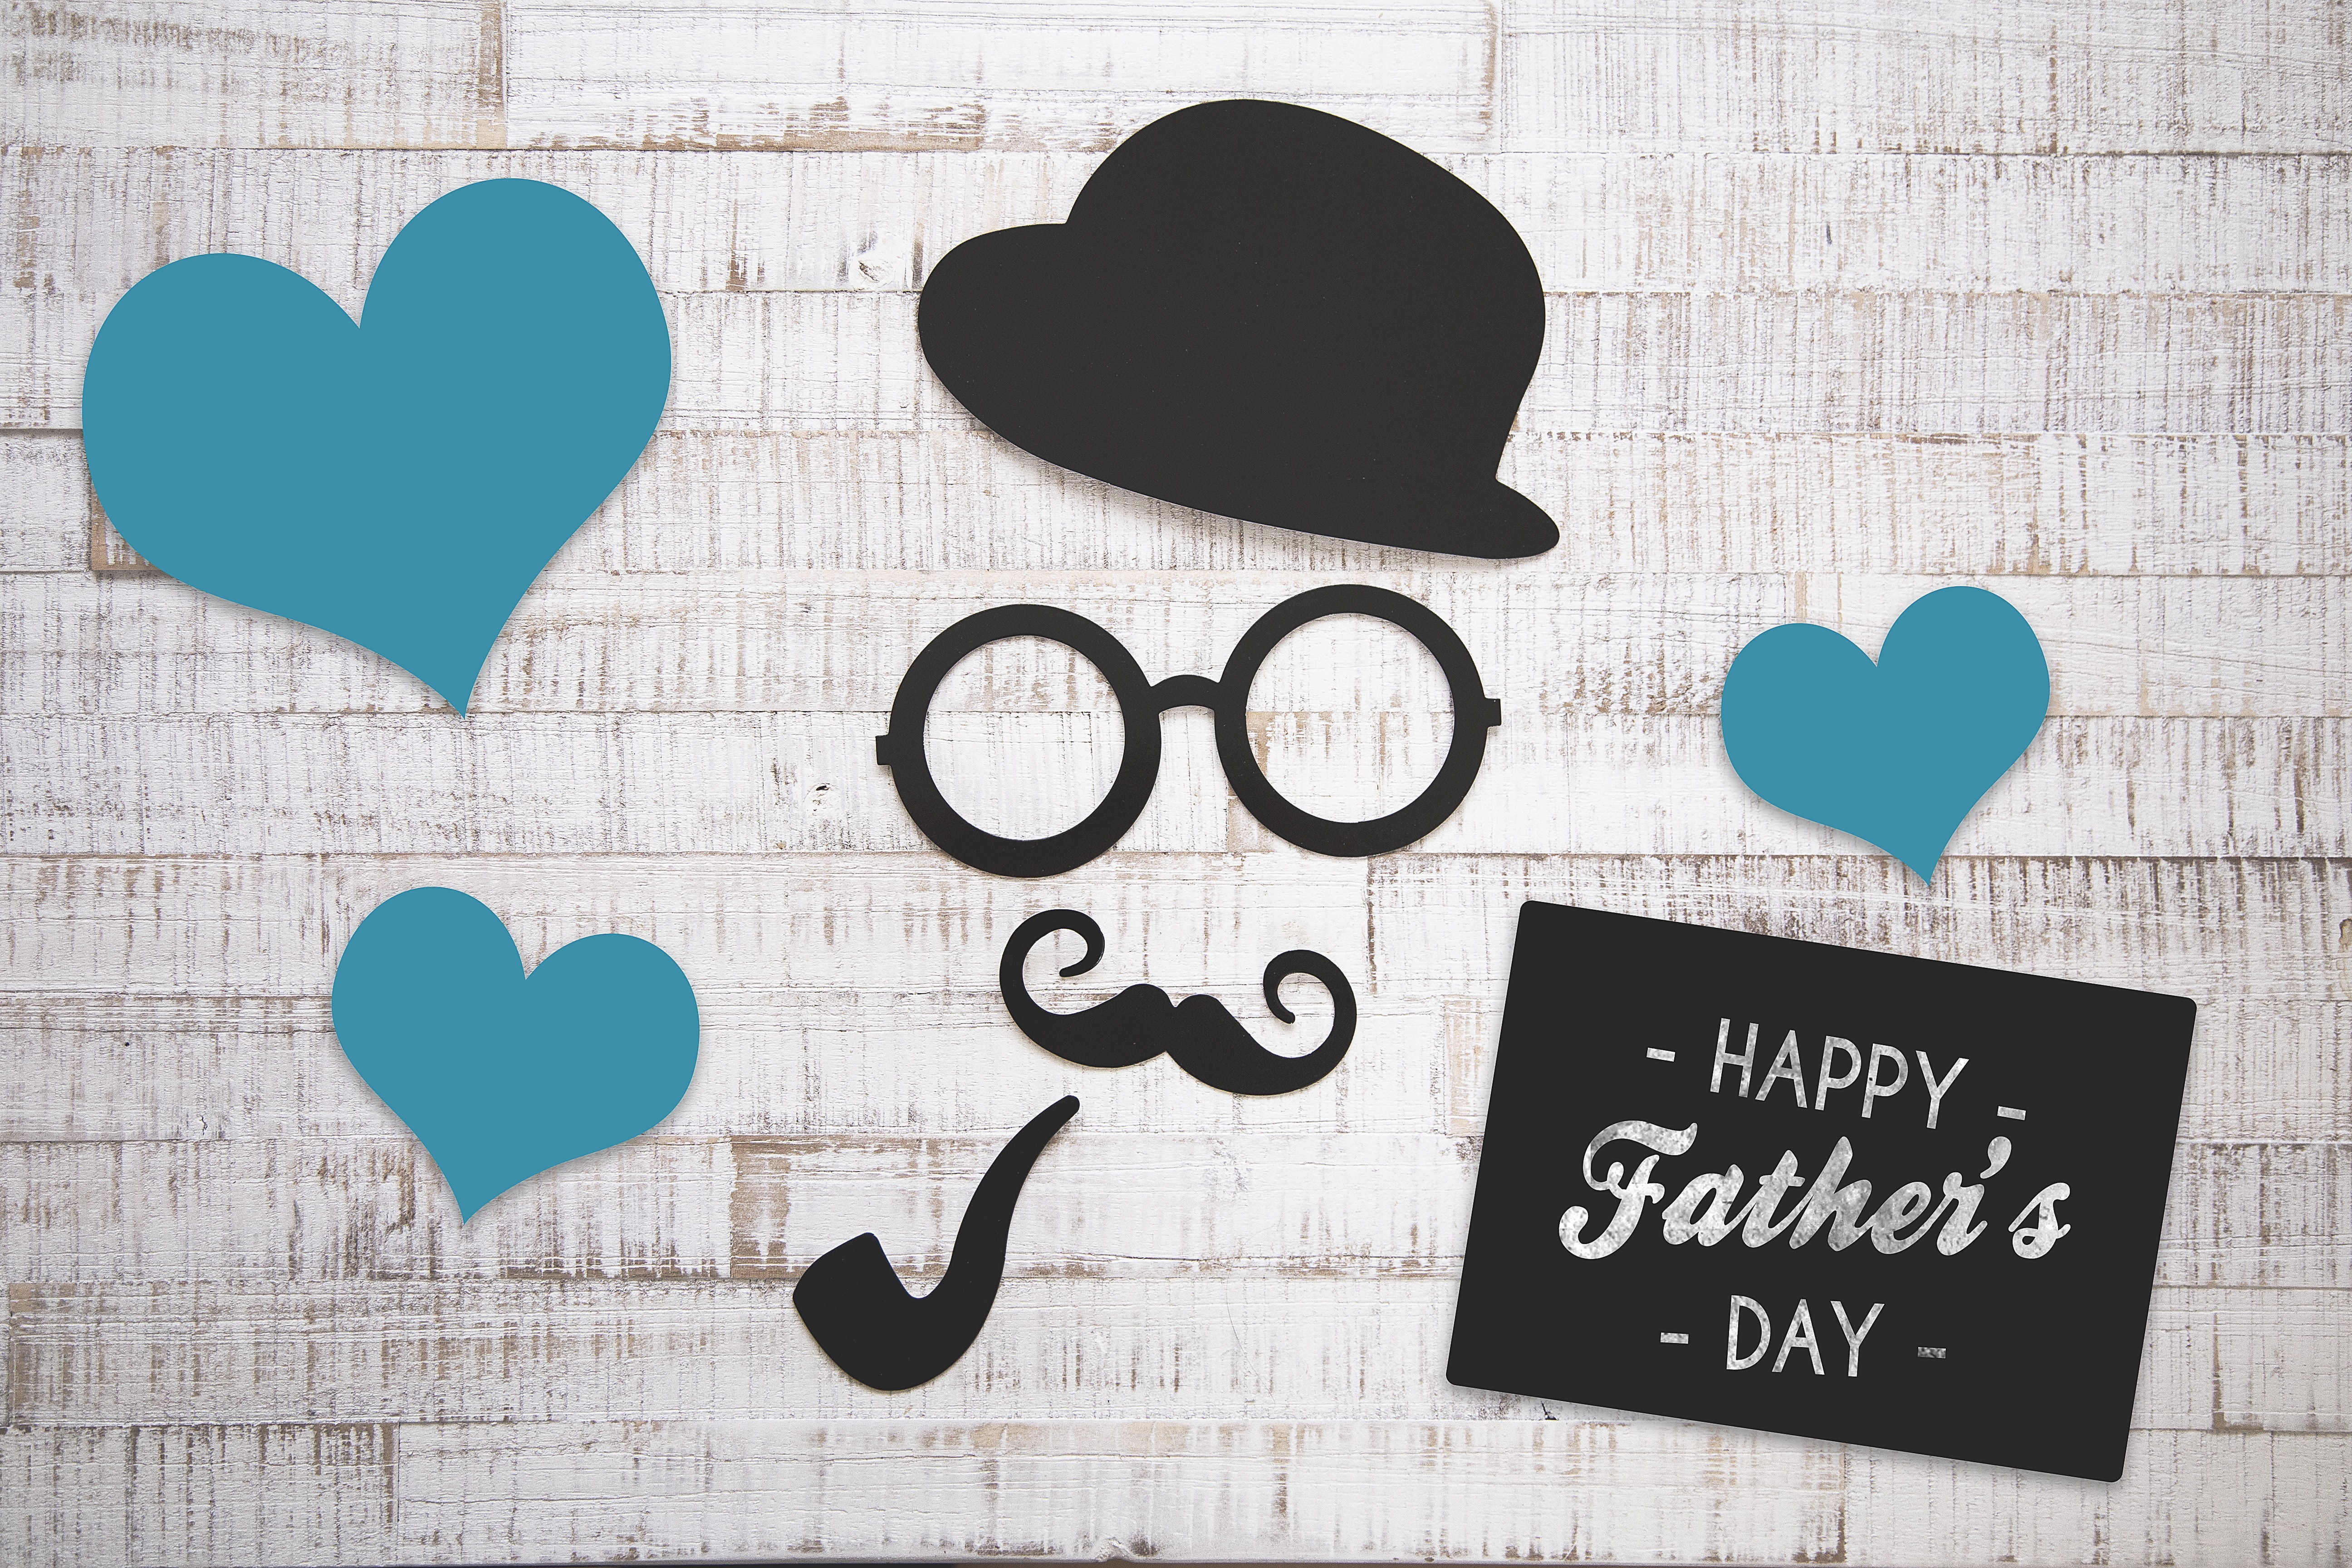 Happy Fathers Day 2019 Wishes - HD Wallpaper 